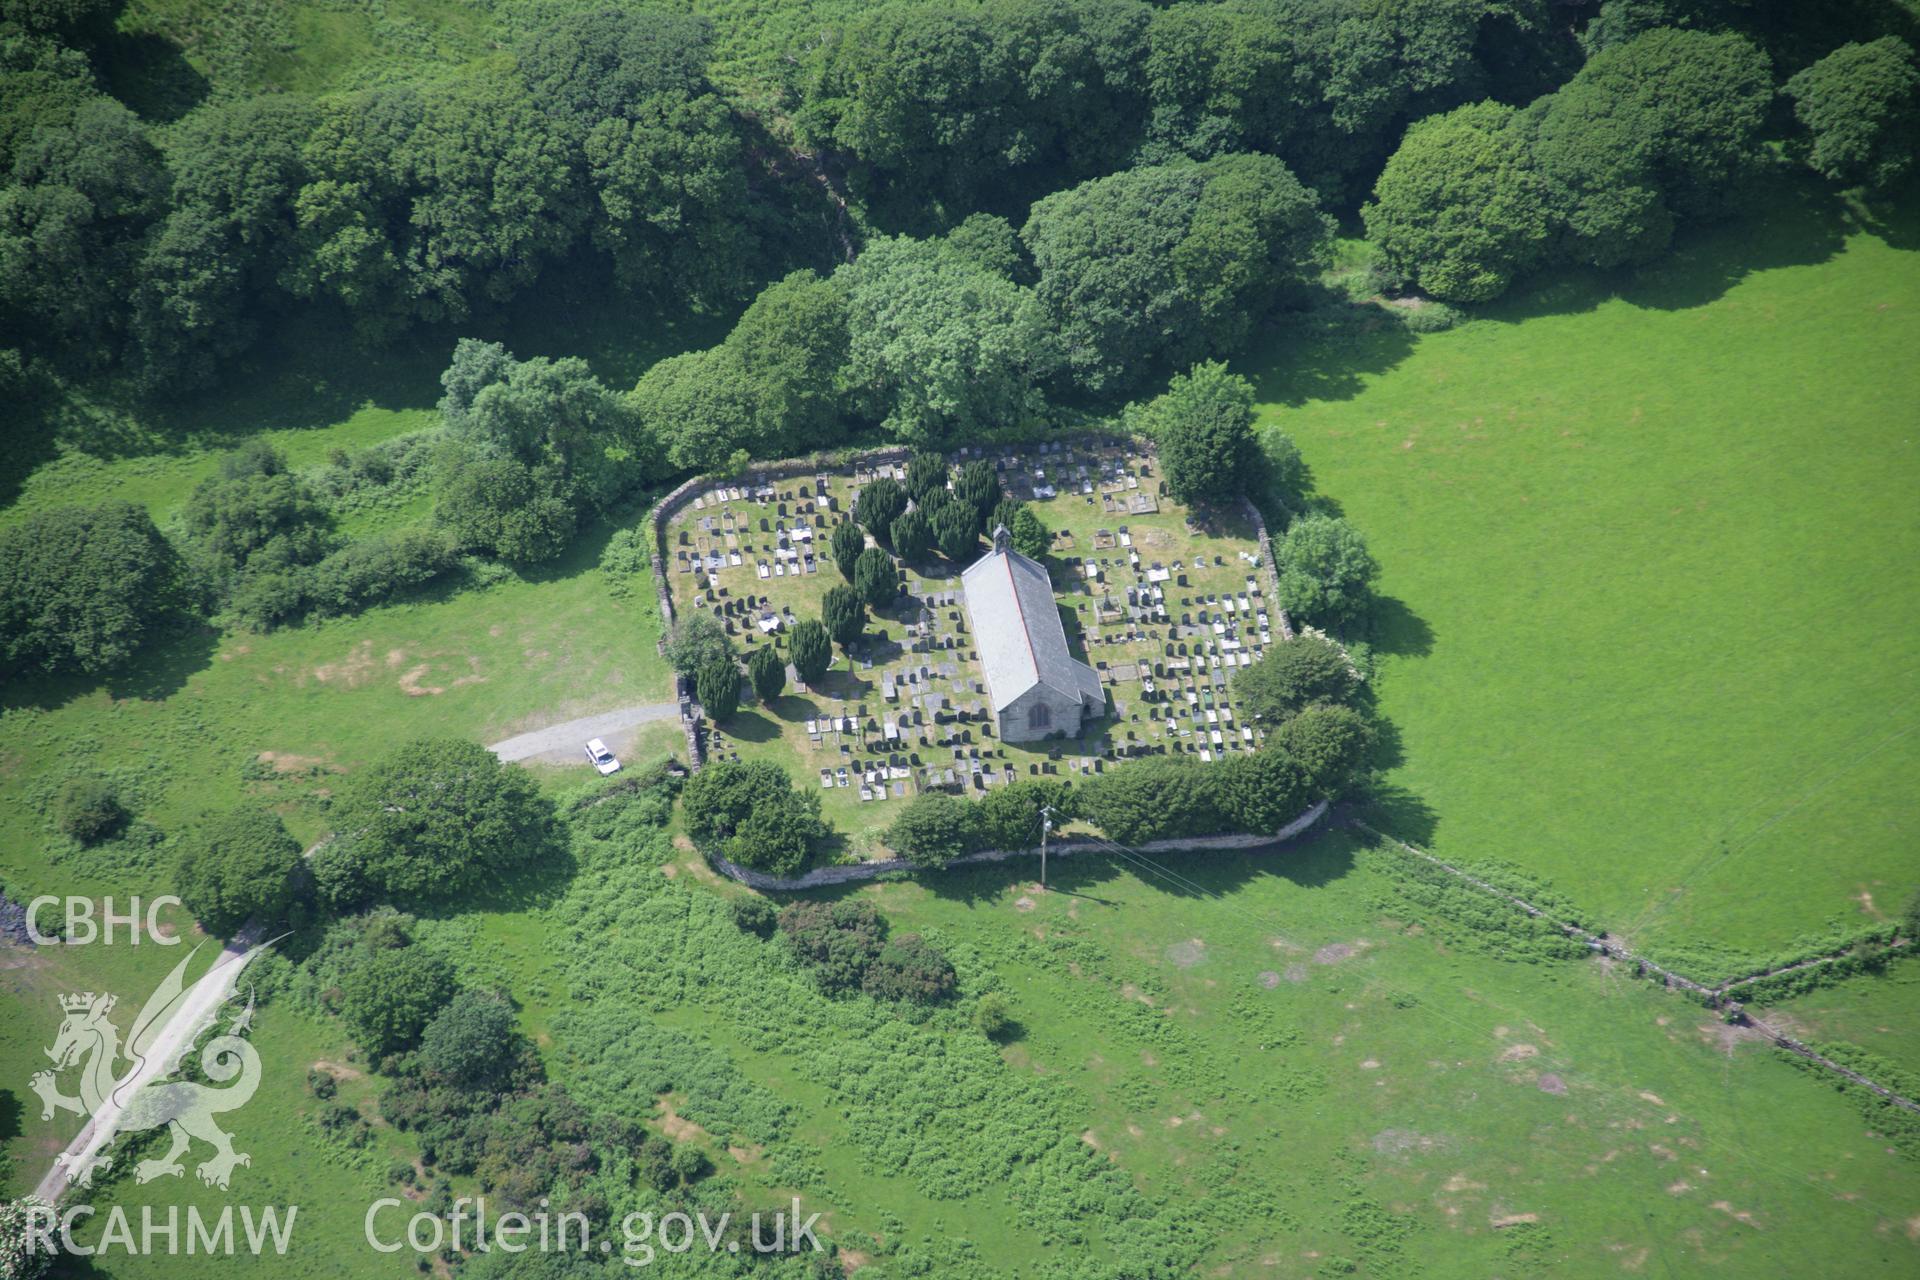 RCAHMW colour oblique aerial photograph of St Michaels Church, Llanfihangel-y-Traethau. From the south-east. Taken on 14 June 2006 by Toby Driver.